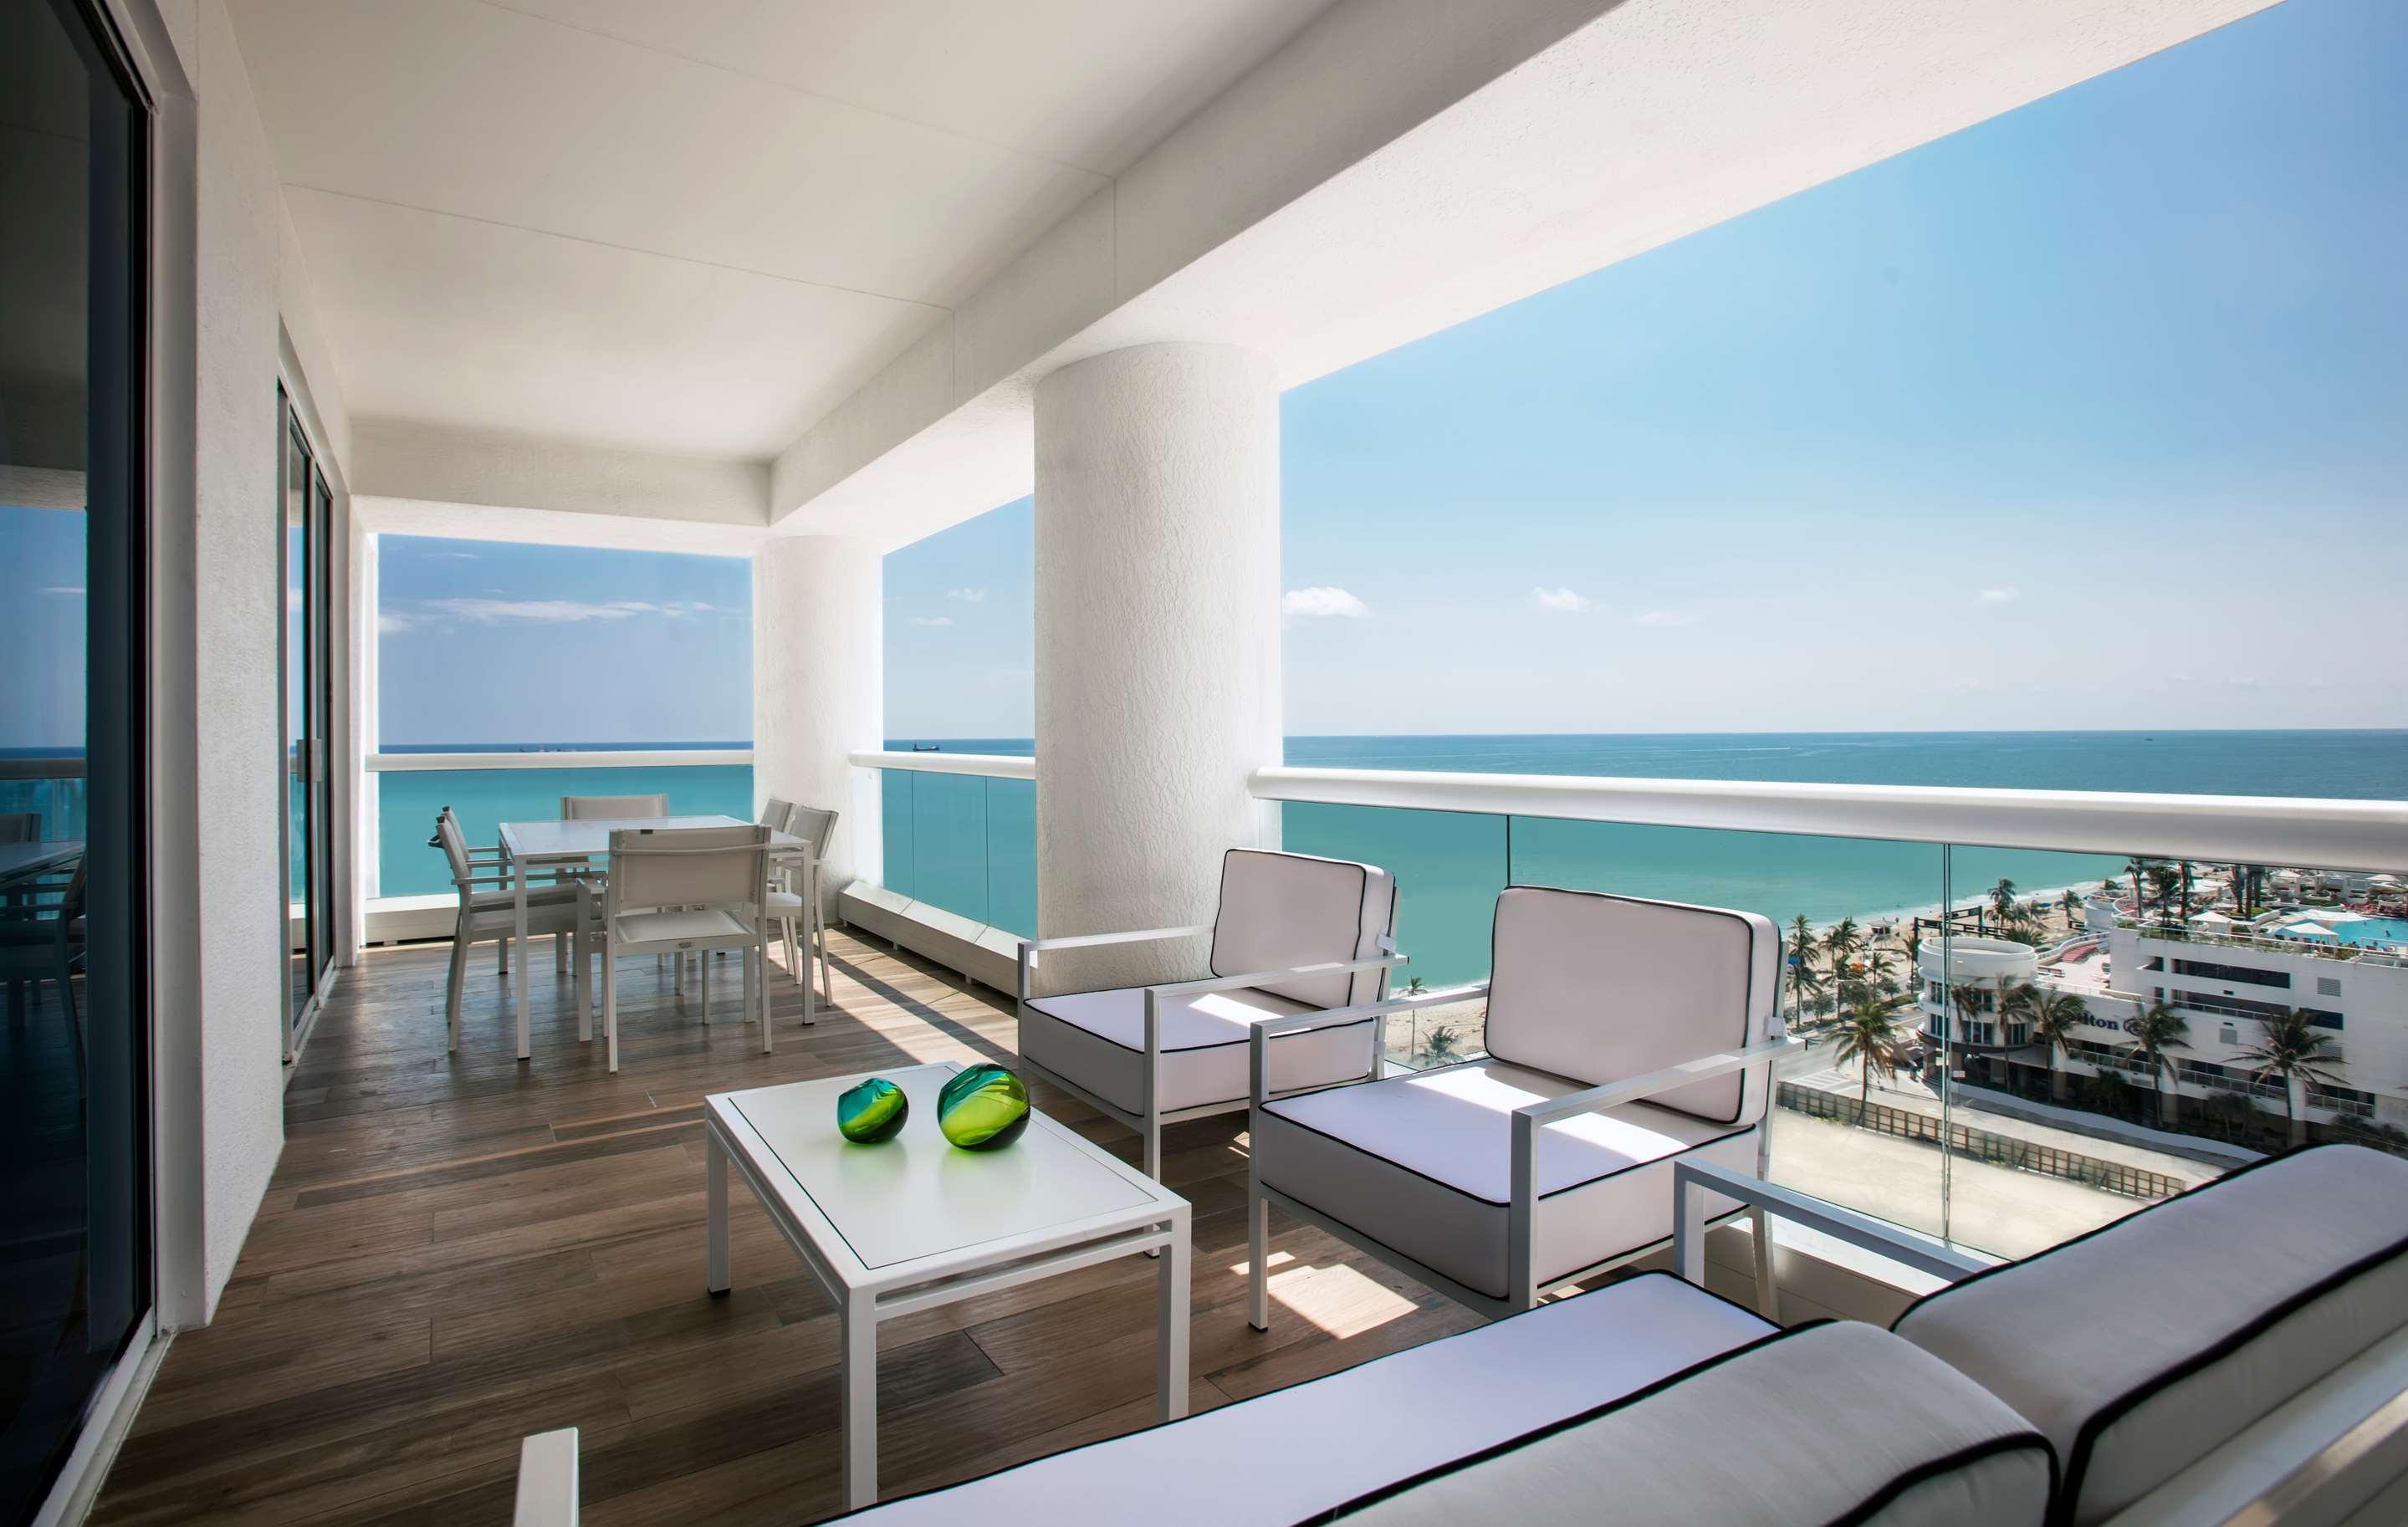 Conrad Fort Lauderdale Beach: Pool & Spa Day Pass Fort Lauderdale